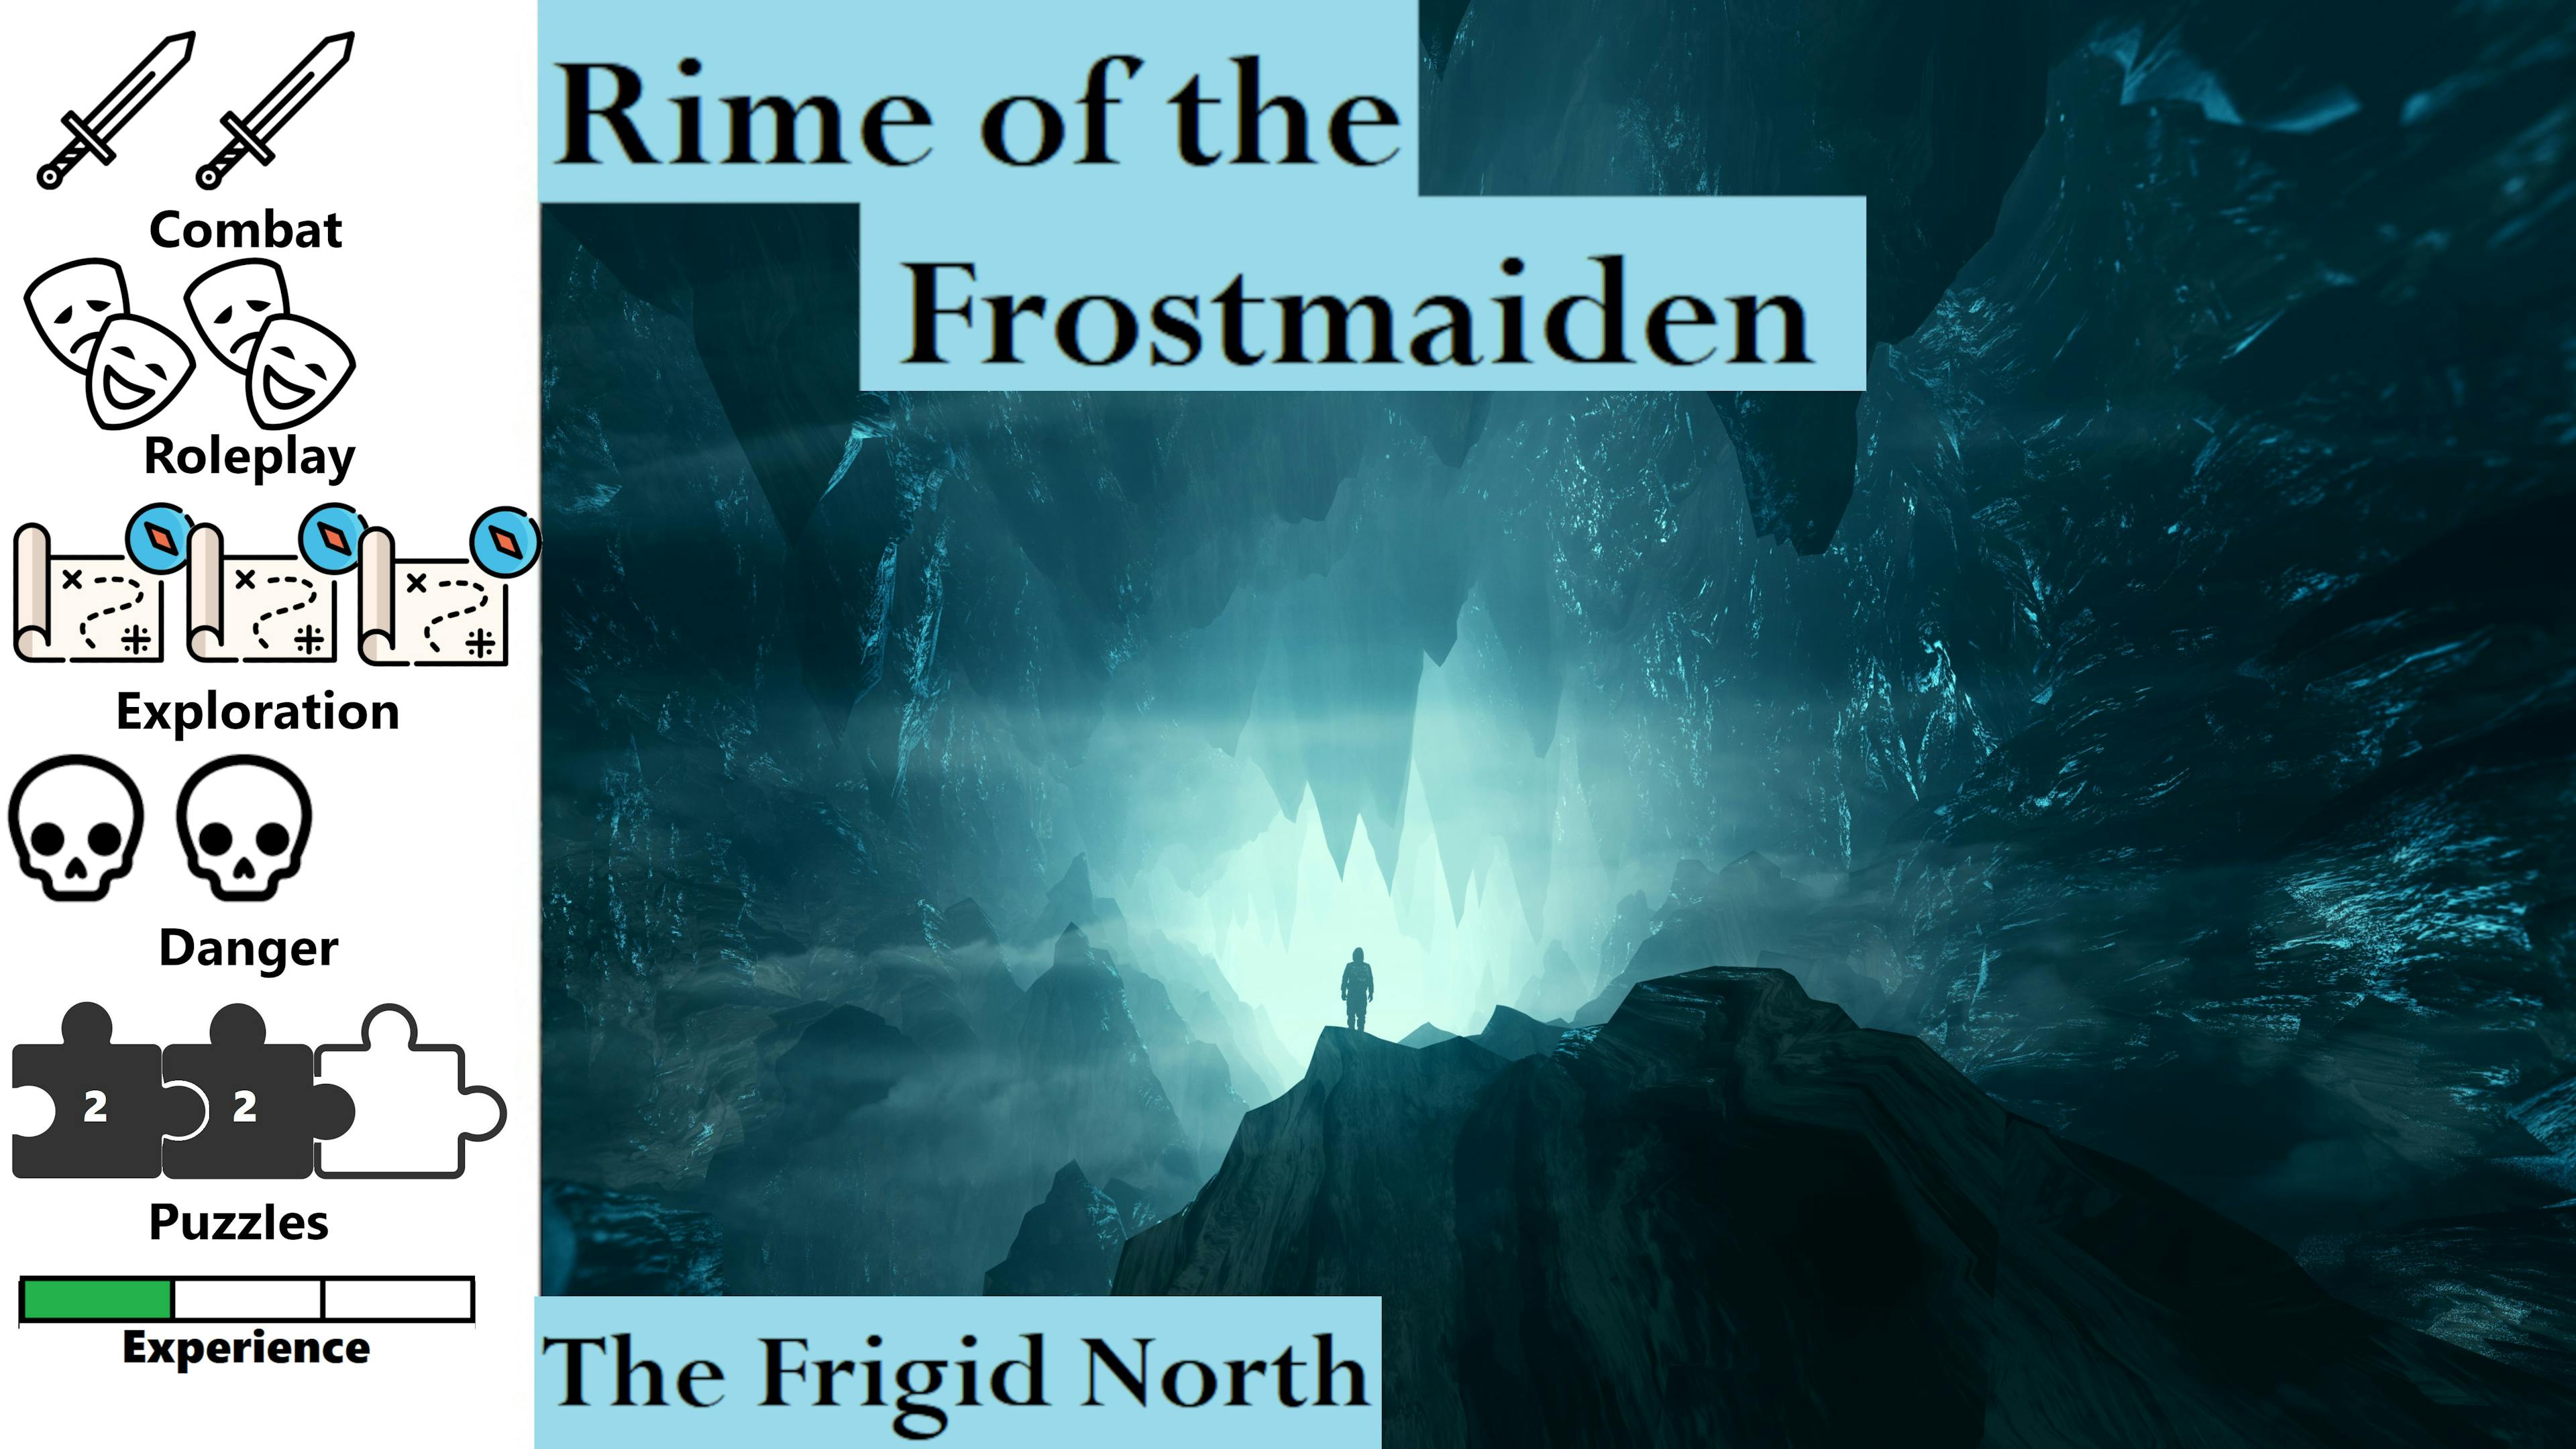 Rime of the Frostmaiden: The Frigid North